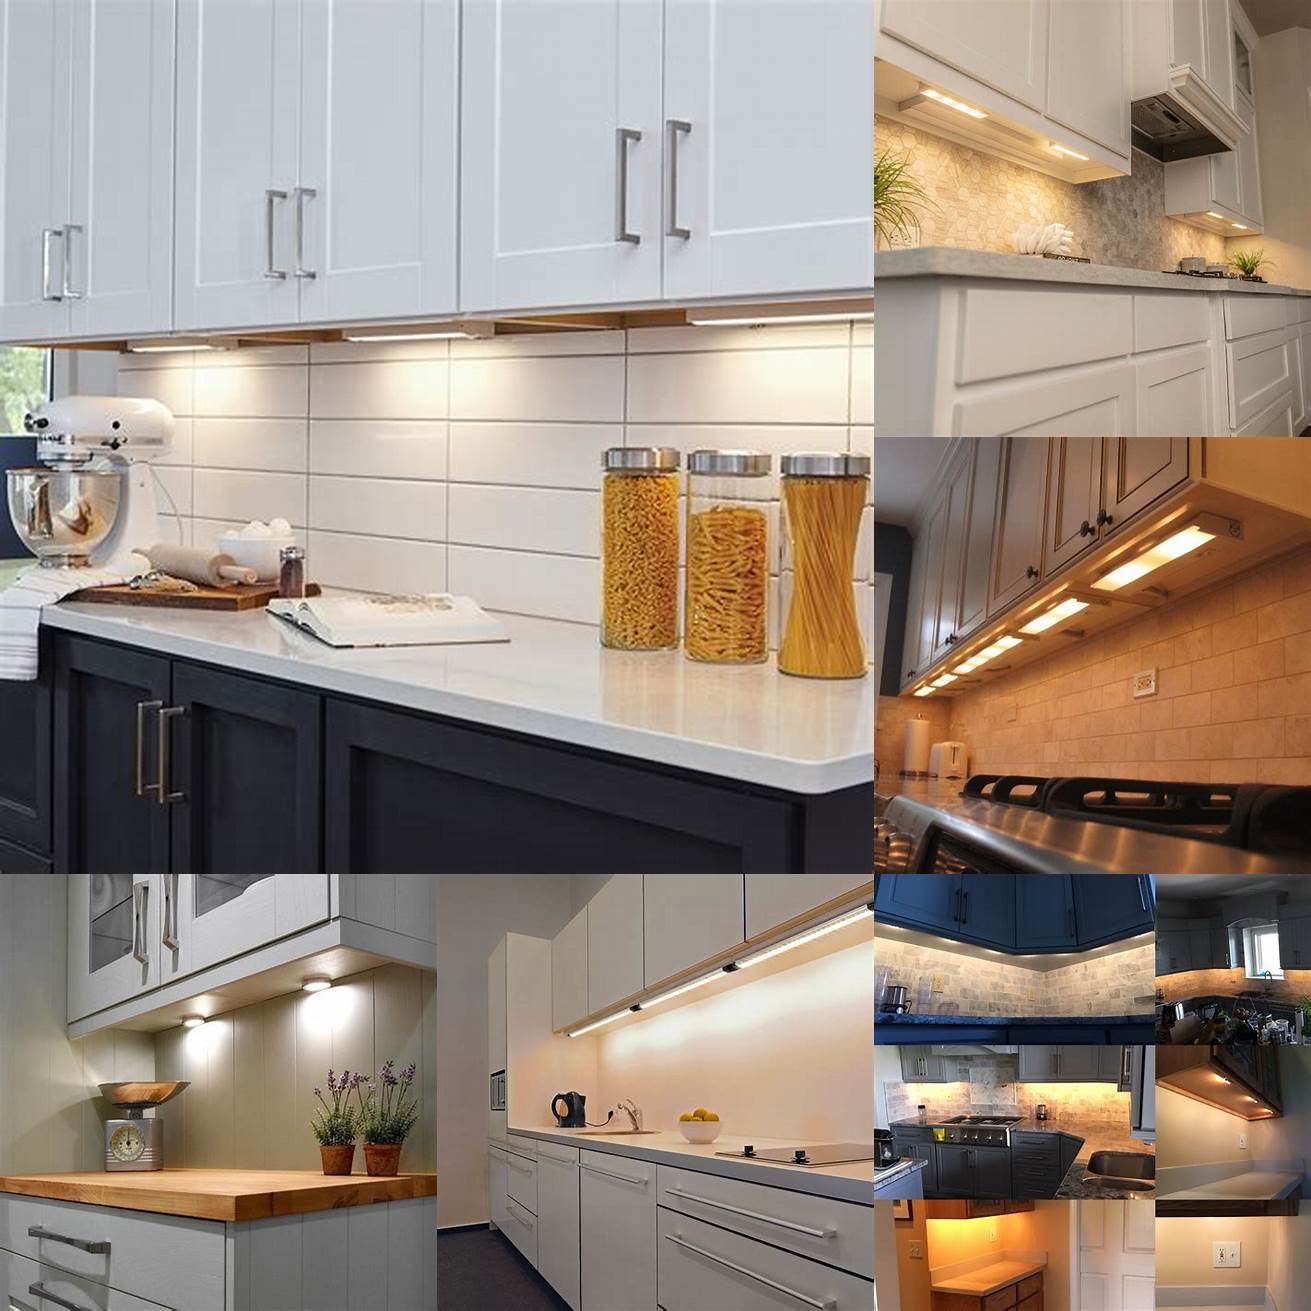 Under-cabinet lighting Under-cabinet lighting is a practical and stylish addition to any kitchen It can help you see better while youre cooking and create a warm inviting atmosphere